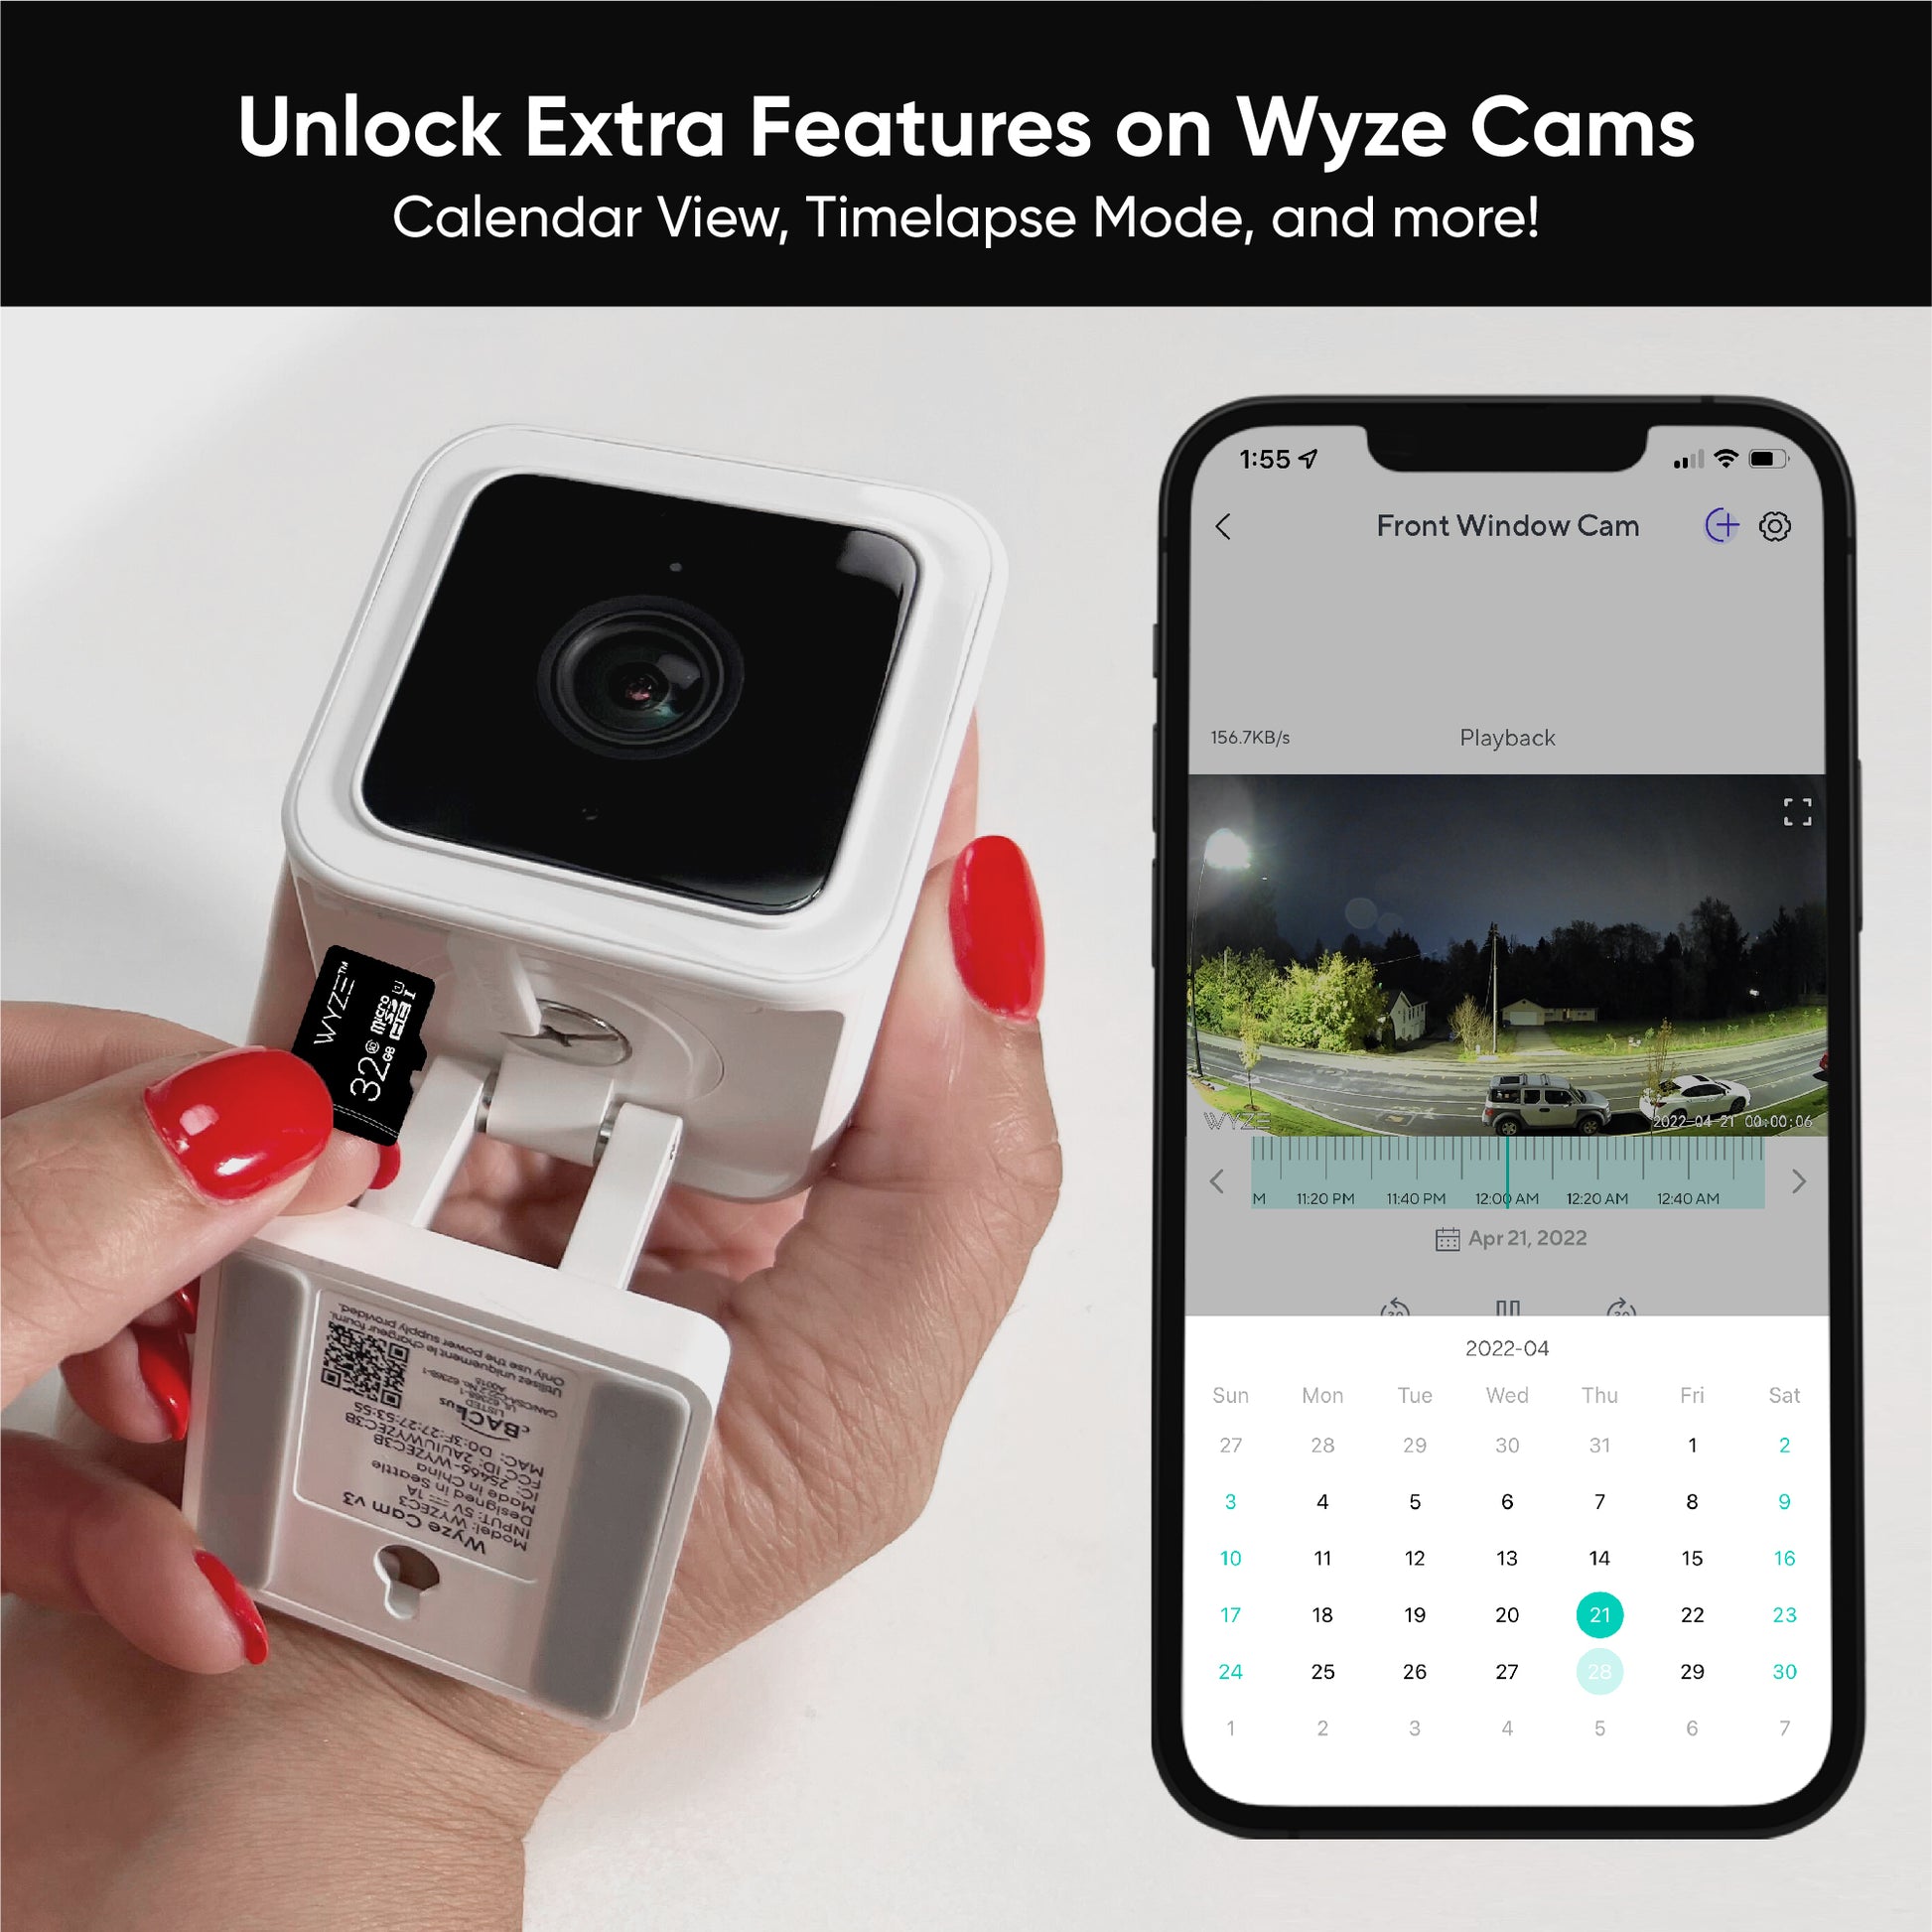 Hand holding a Wyze Cam v3 while another hand inserts a microSD card into the bottom of the device.